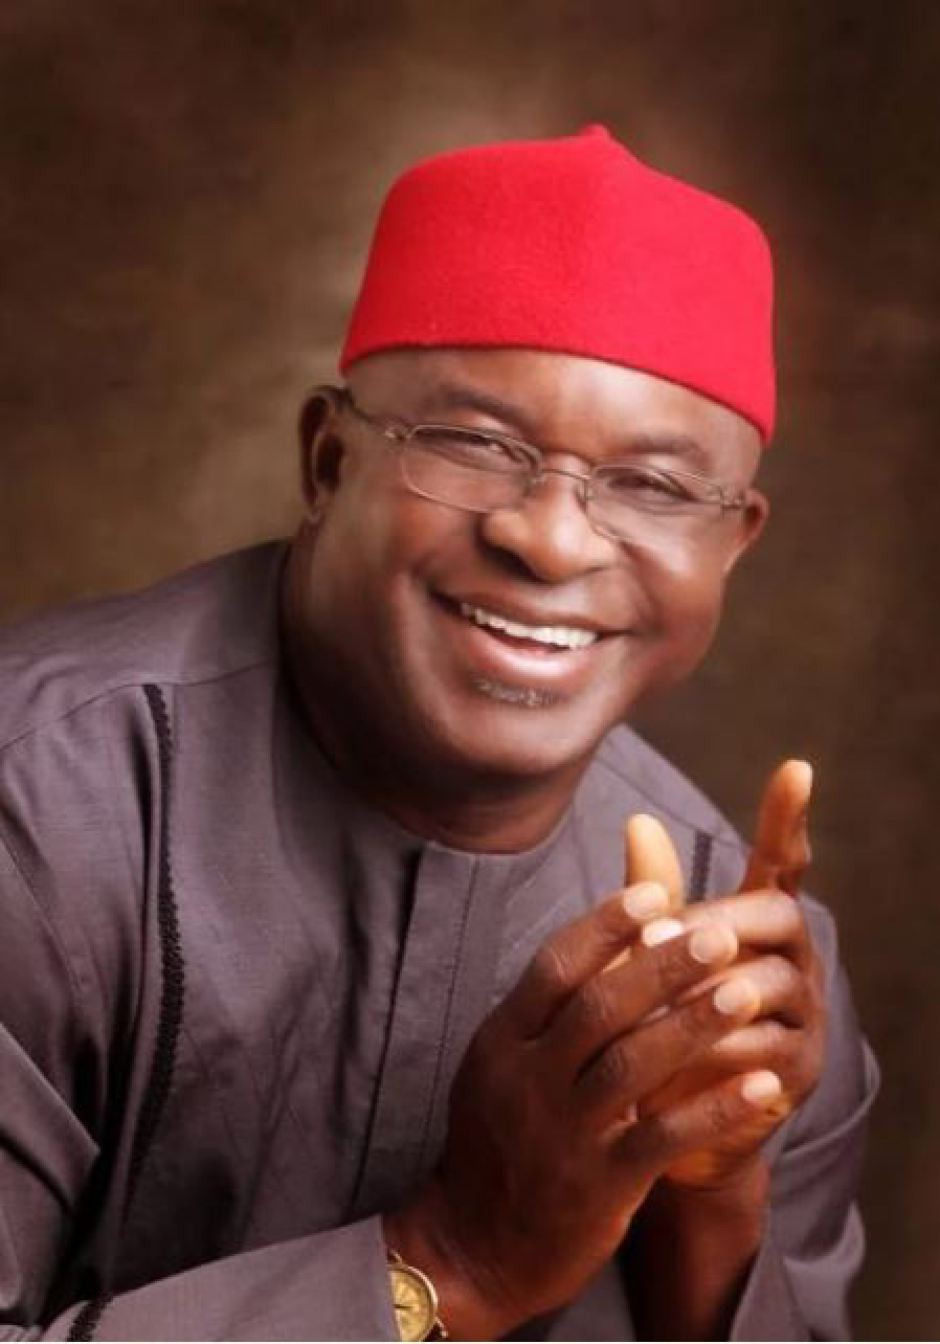 David Mark joins presidential race says, “I will fix economy in two years”